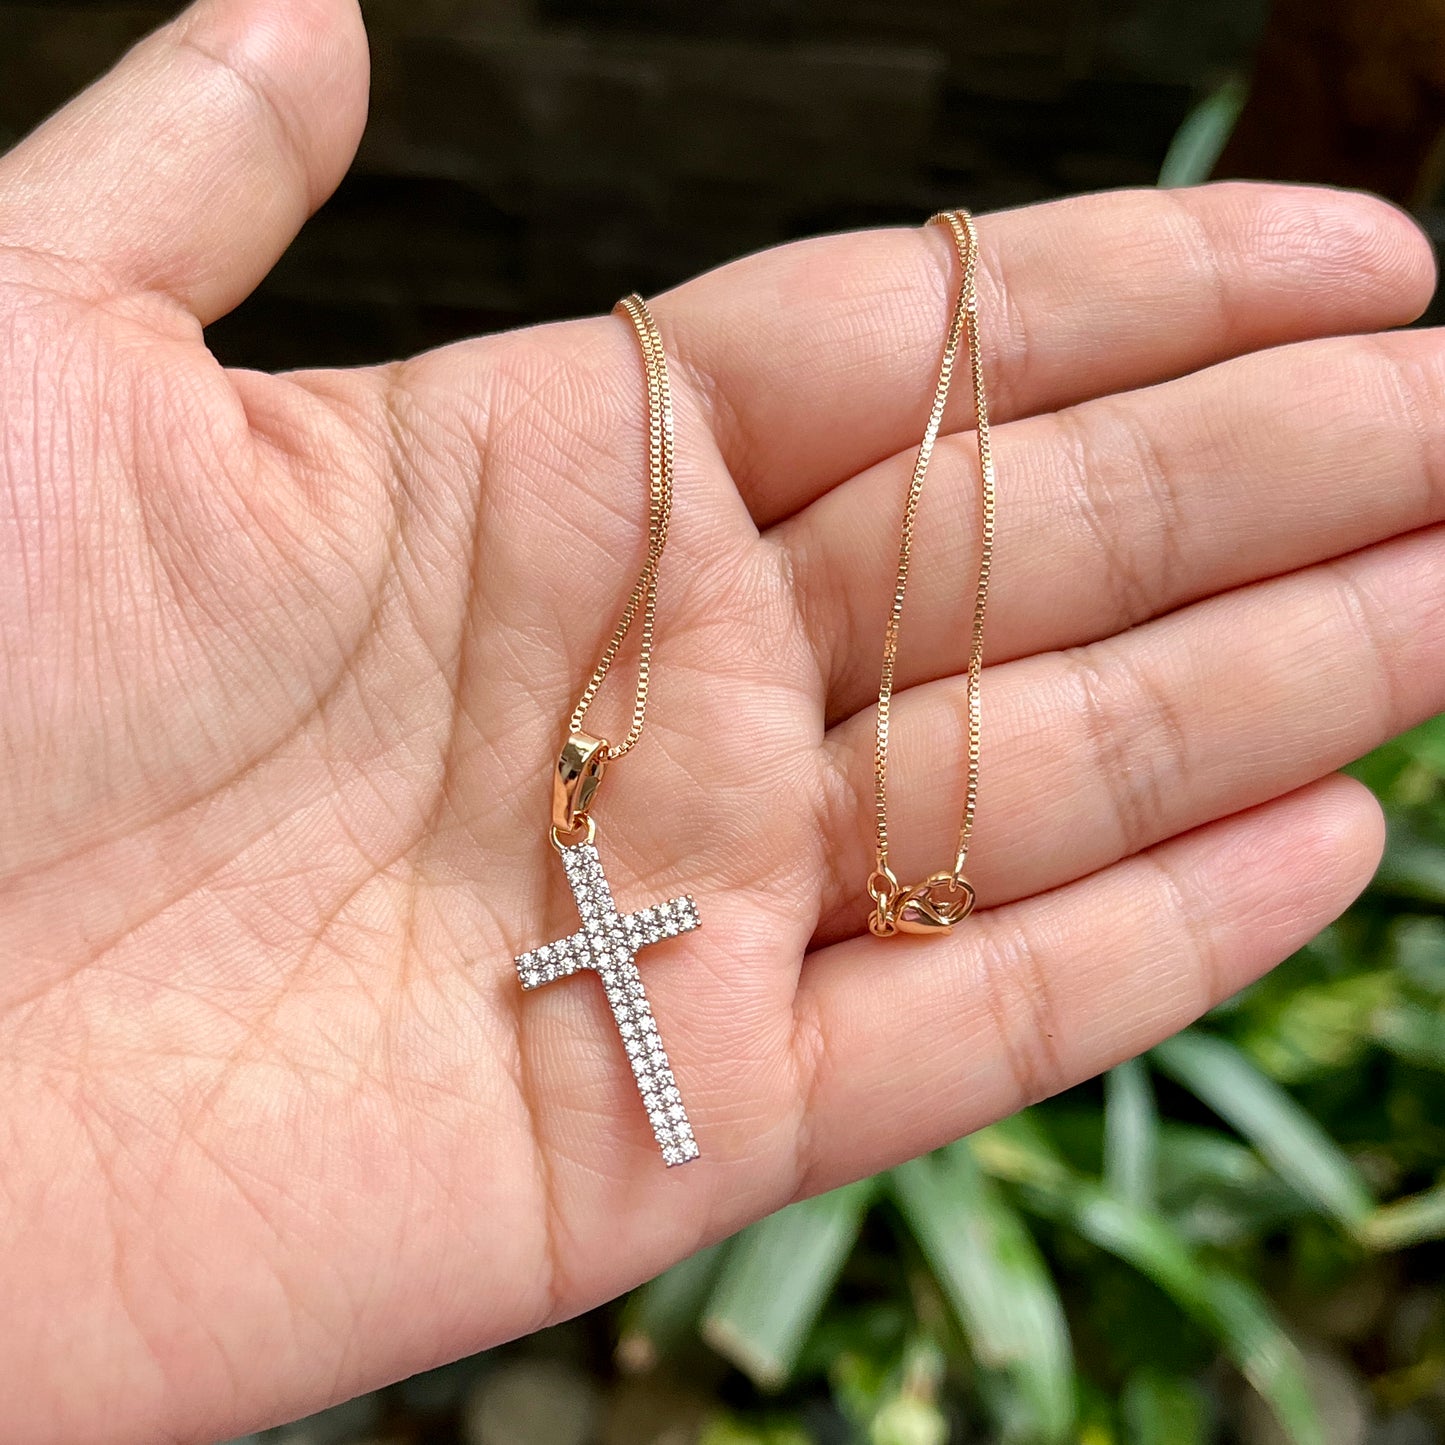 The Key of Life Cross Necklace